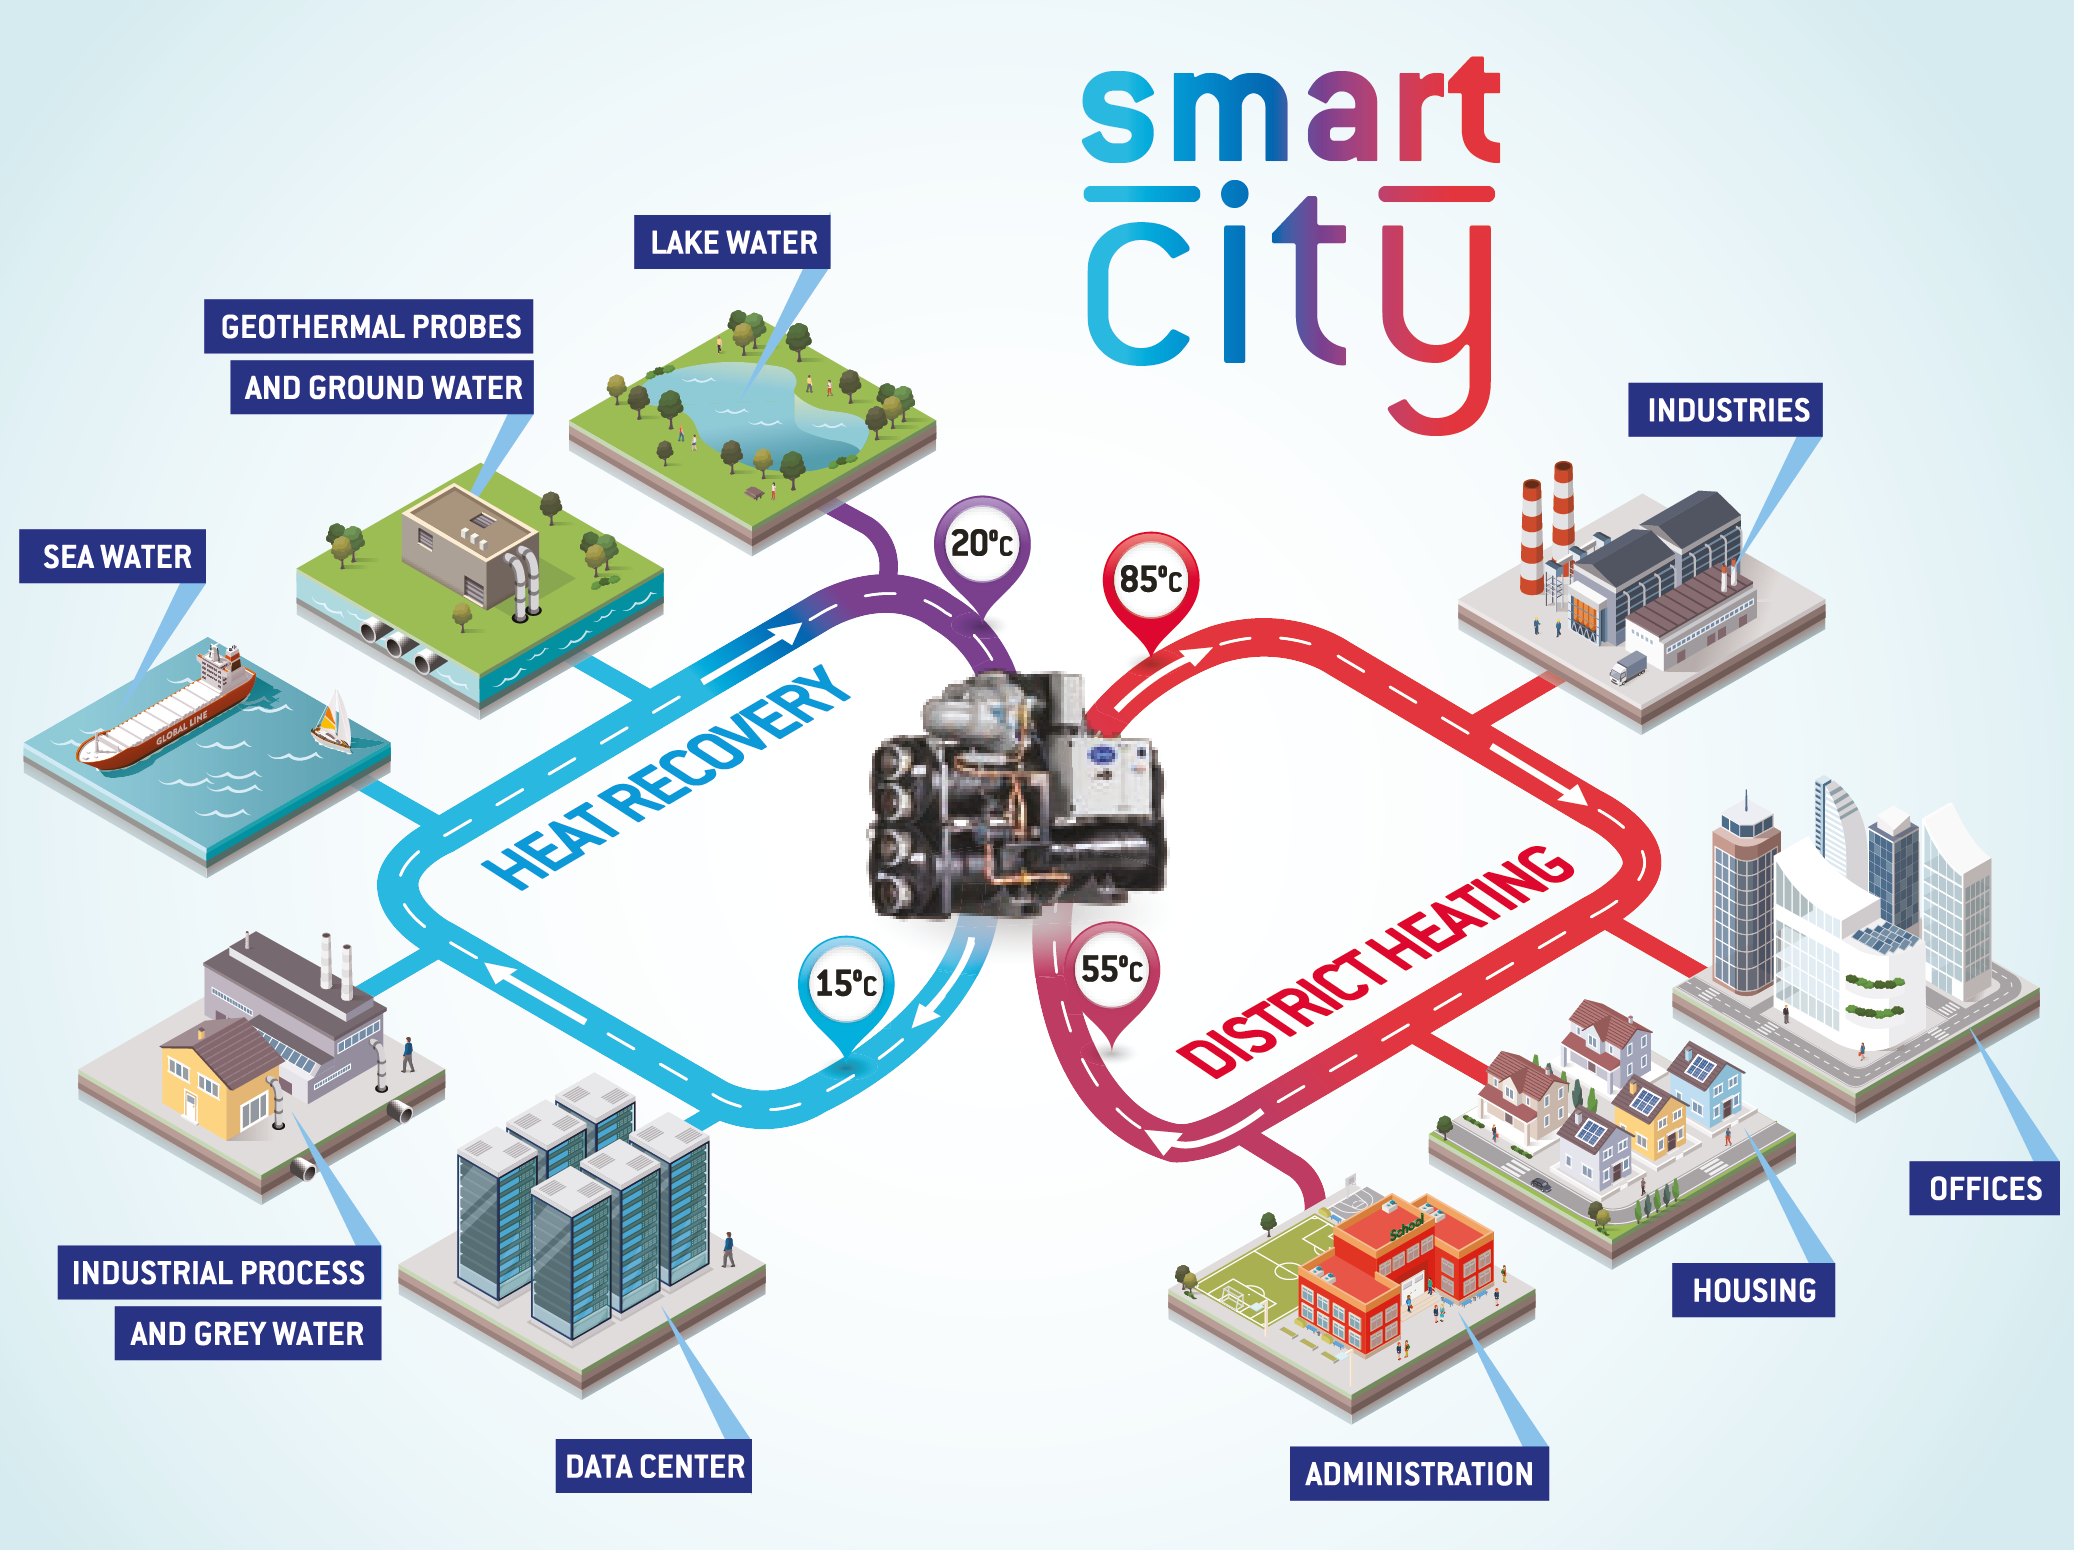 Carrier Highlights the Potential of Smart Cities to Deliver Huge Energy Savings